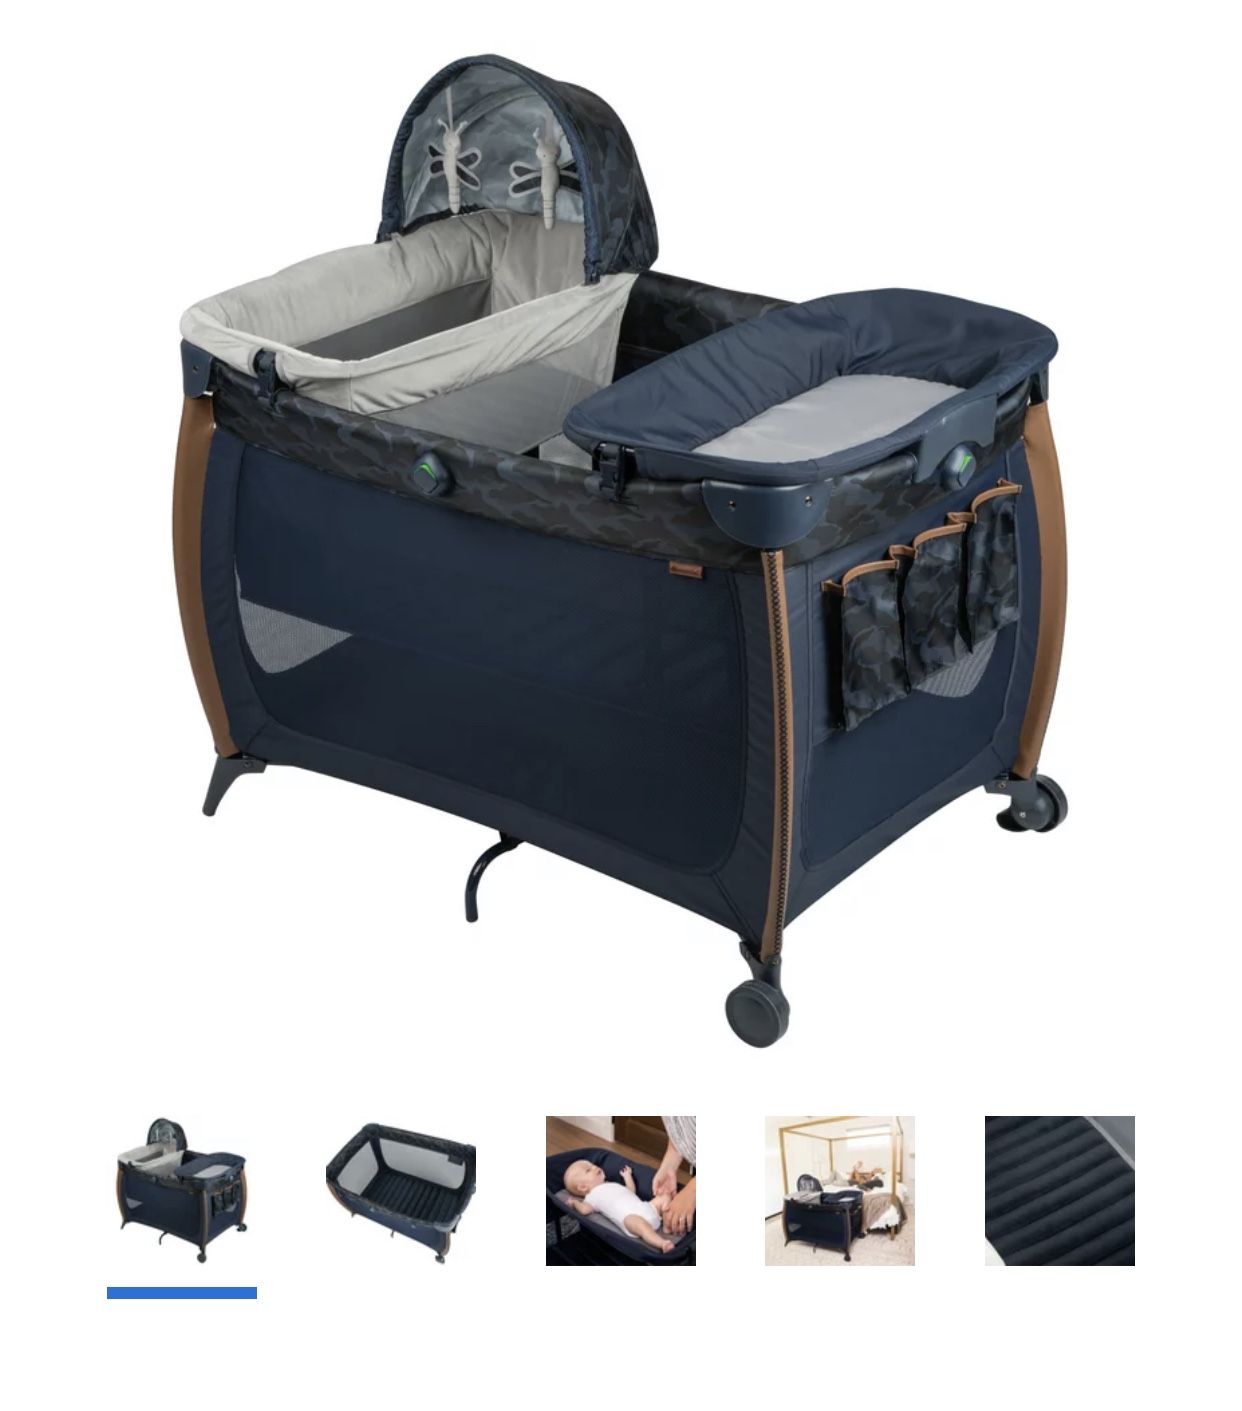 Playpen, Bassinet, Changing Table